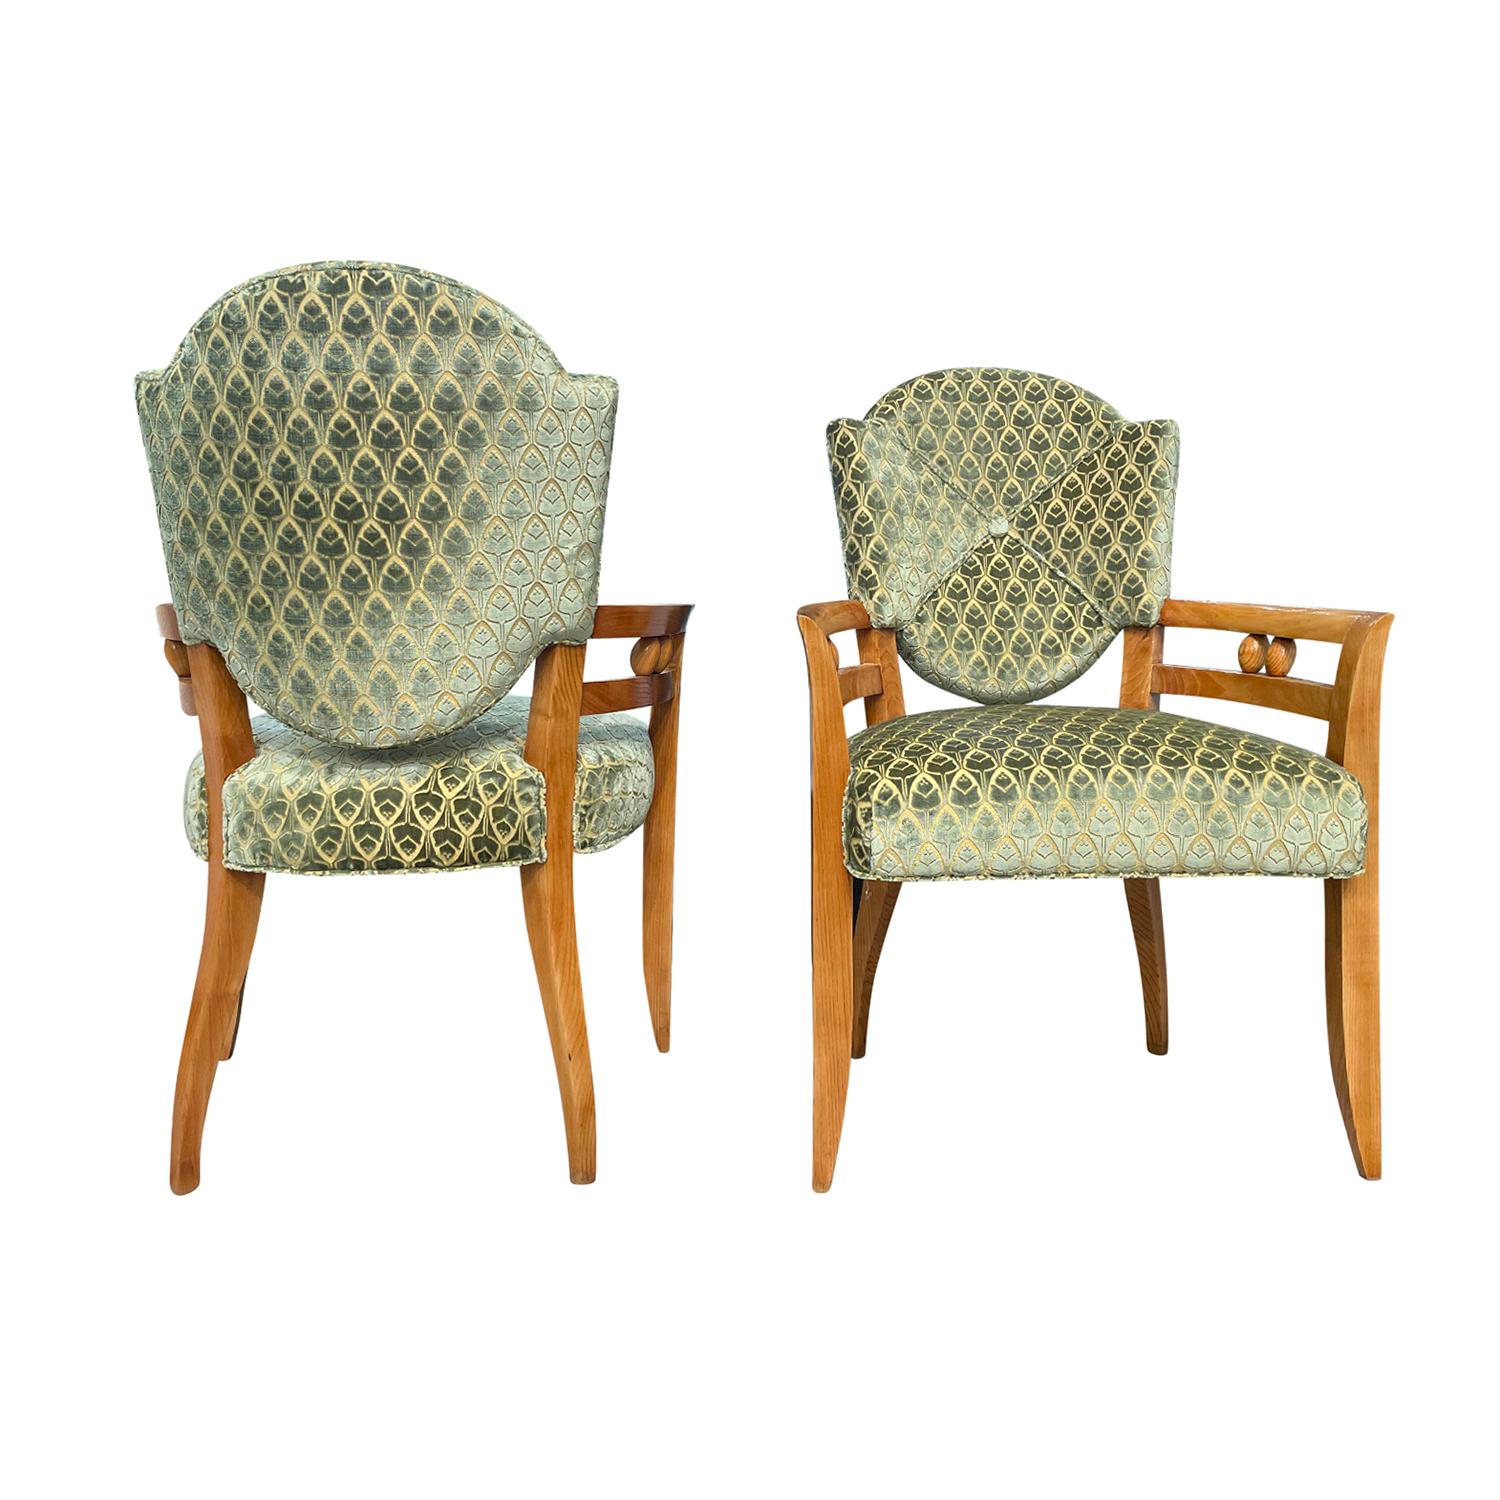 20th Century Pair of French Vintage Art Deco Oakwood Armchairs by André Arbus For Sale 2